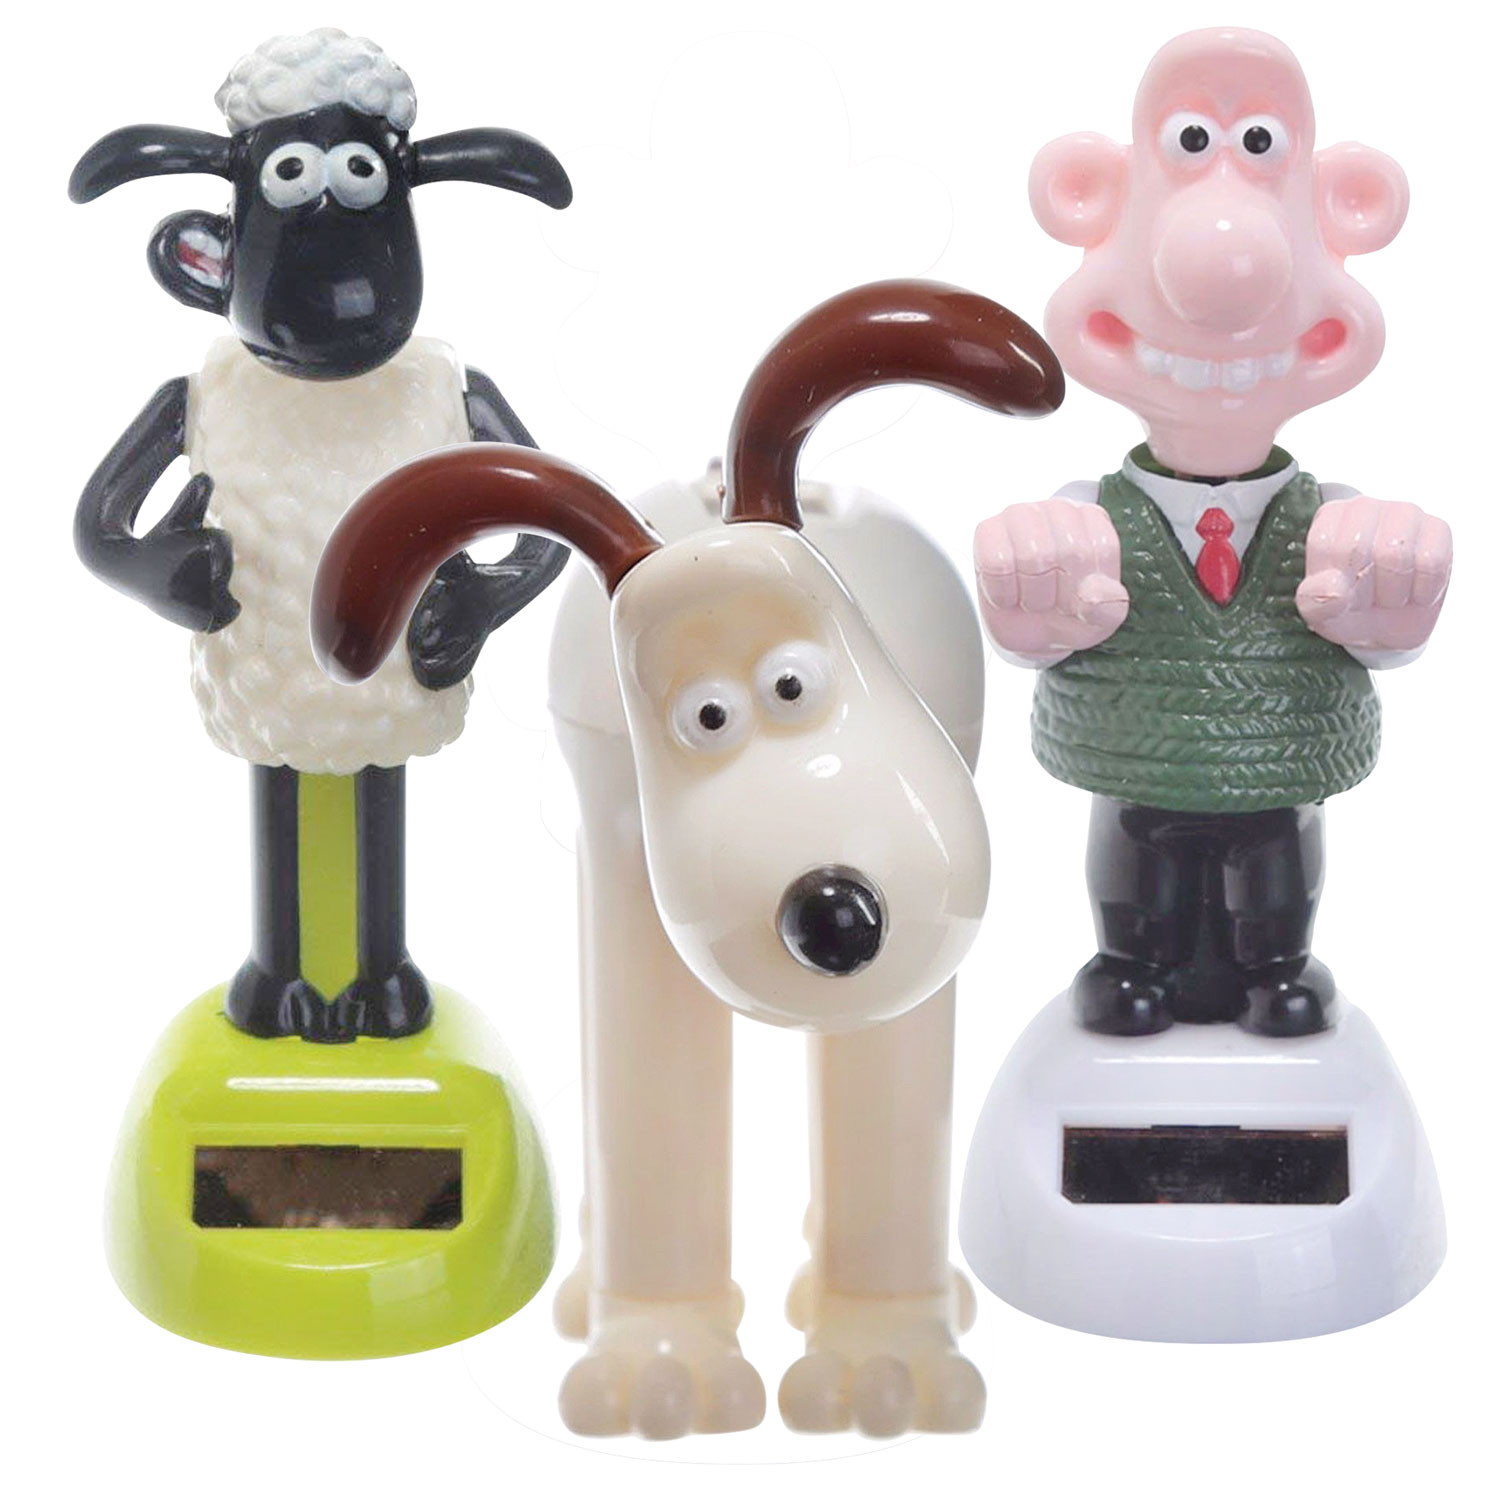 Wallace And Gromit Shaun The Sheep Figurine Set Animated Solar